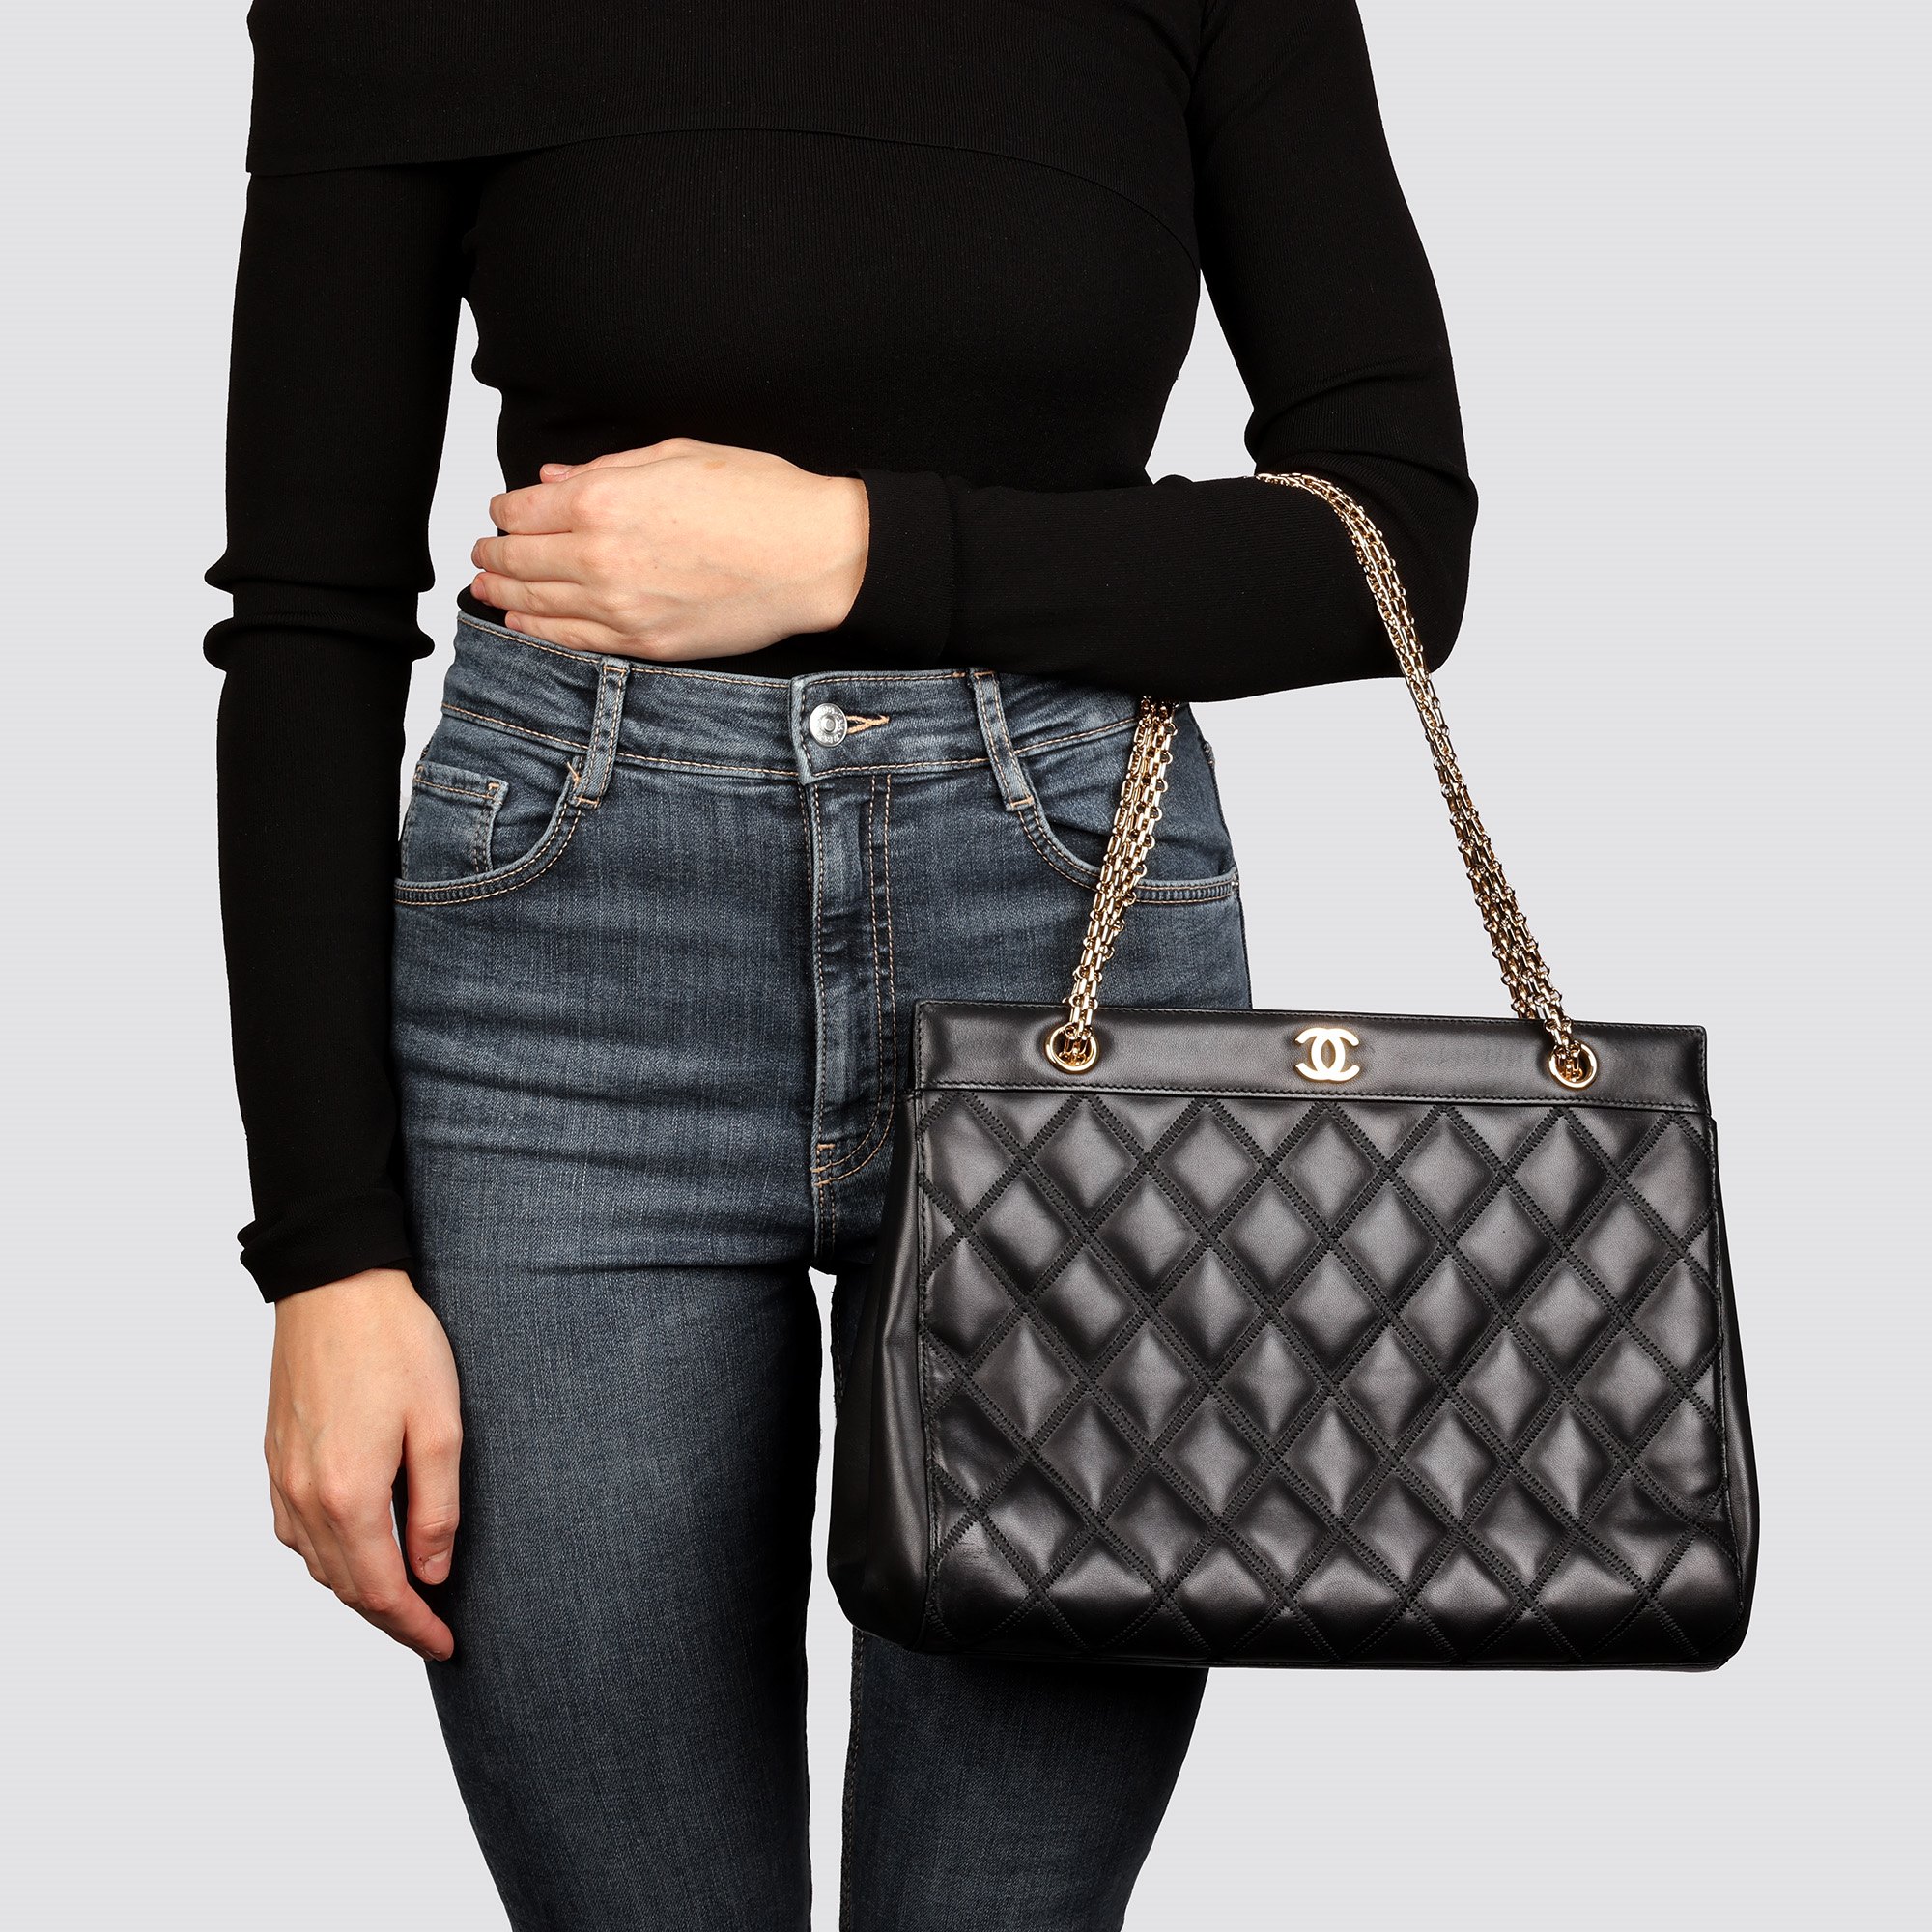 Chanel Black Quilted Lambskin Vintage Classic Tote